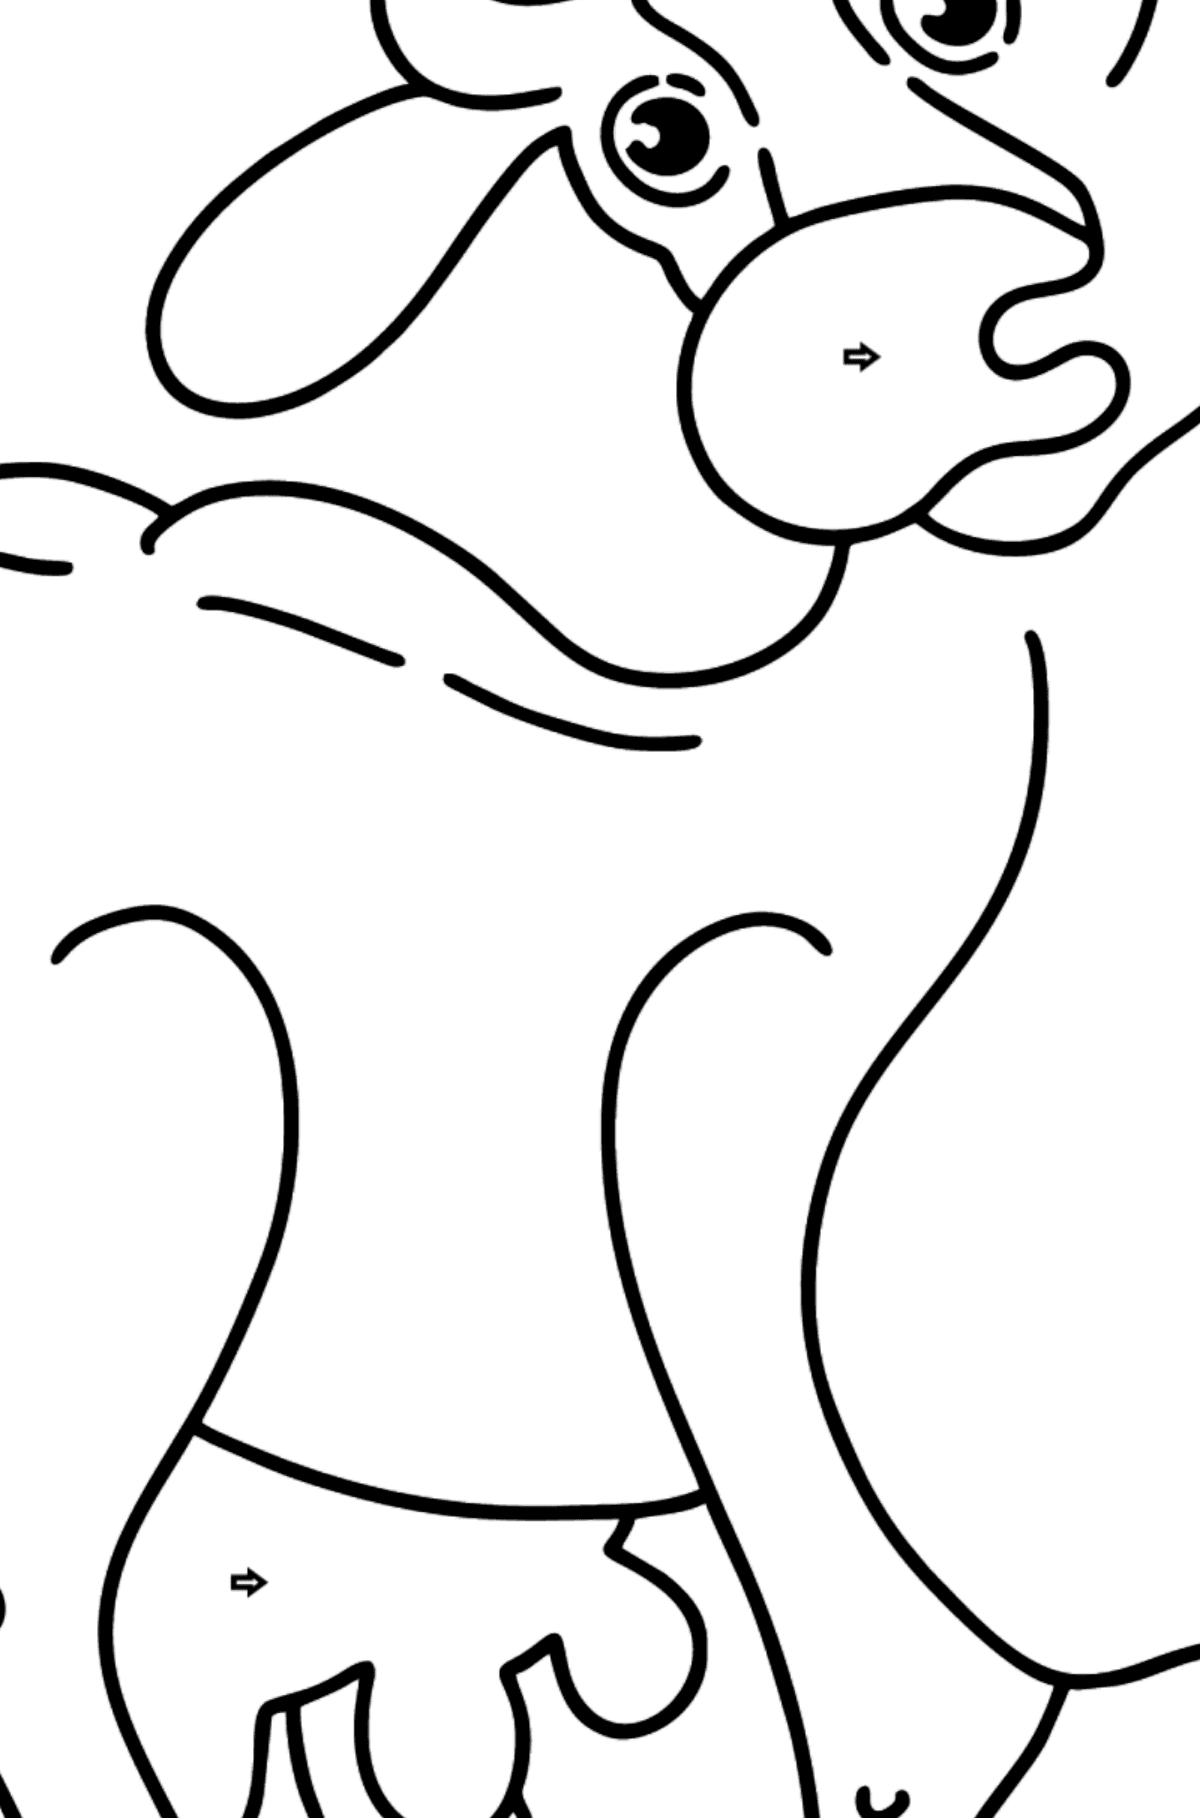 Cow coloring page - Coloring by Geometric Shapes for Kids